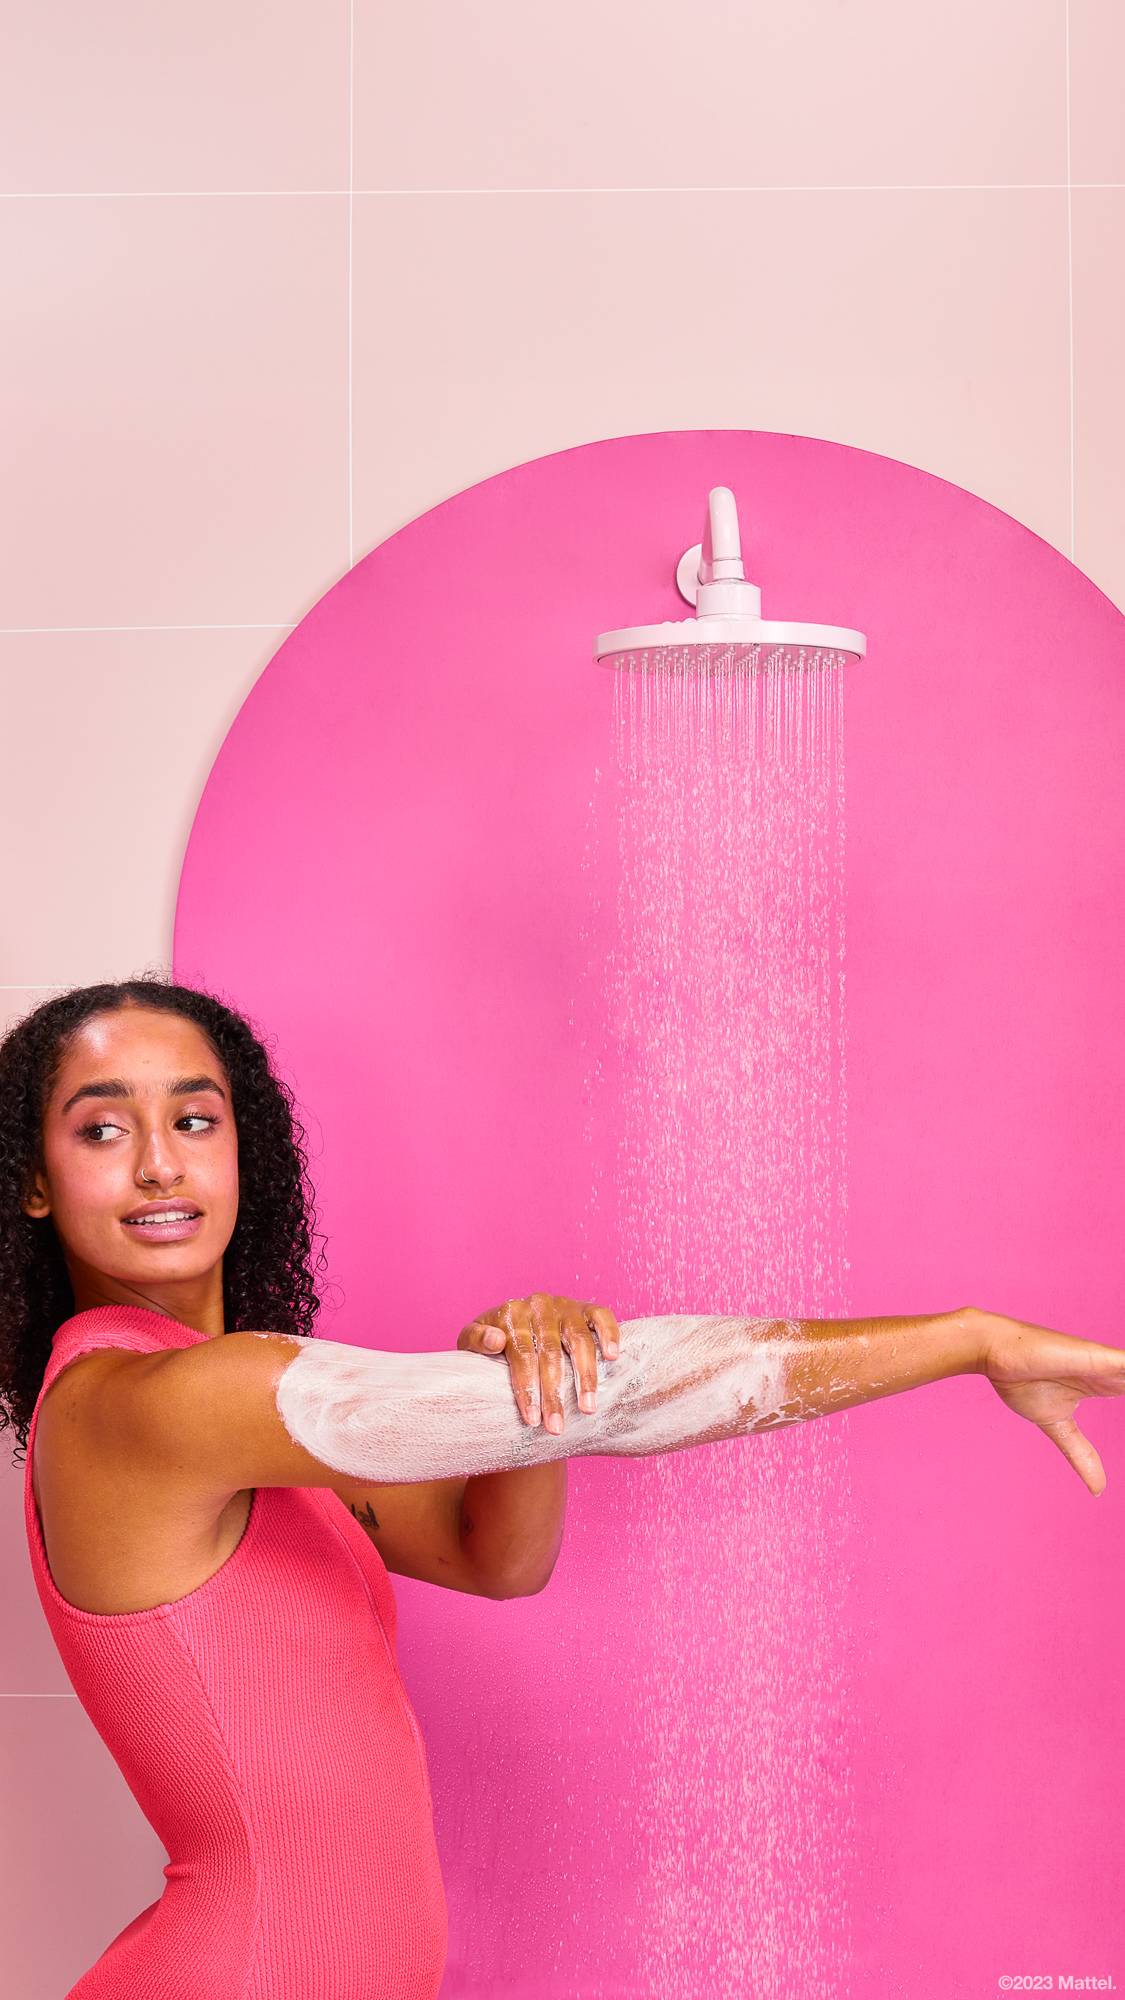 Model is stood under a running shower in a pink swimming costume. They are exfoliating the body scrub over their arm.